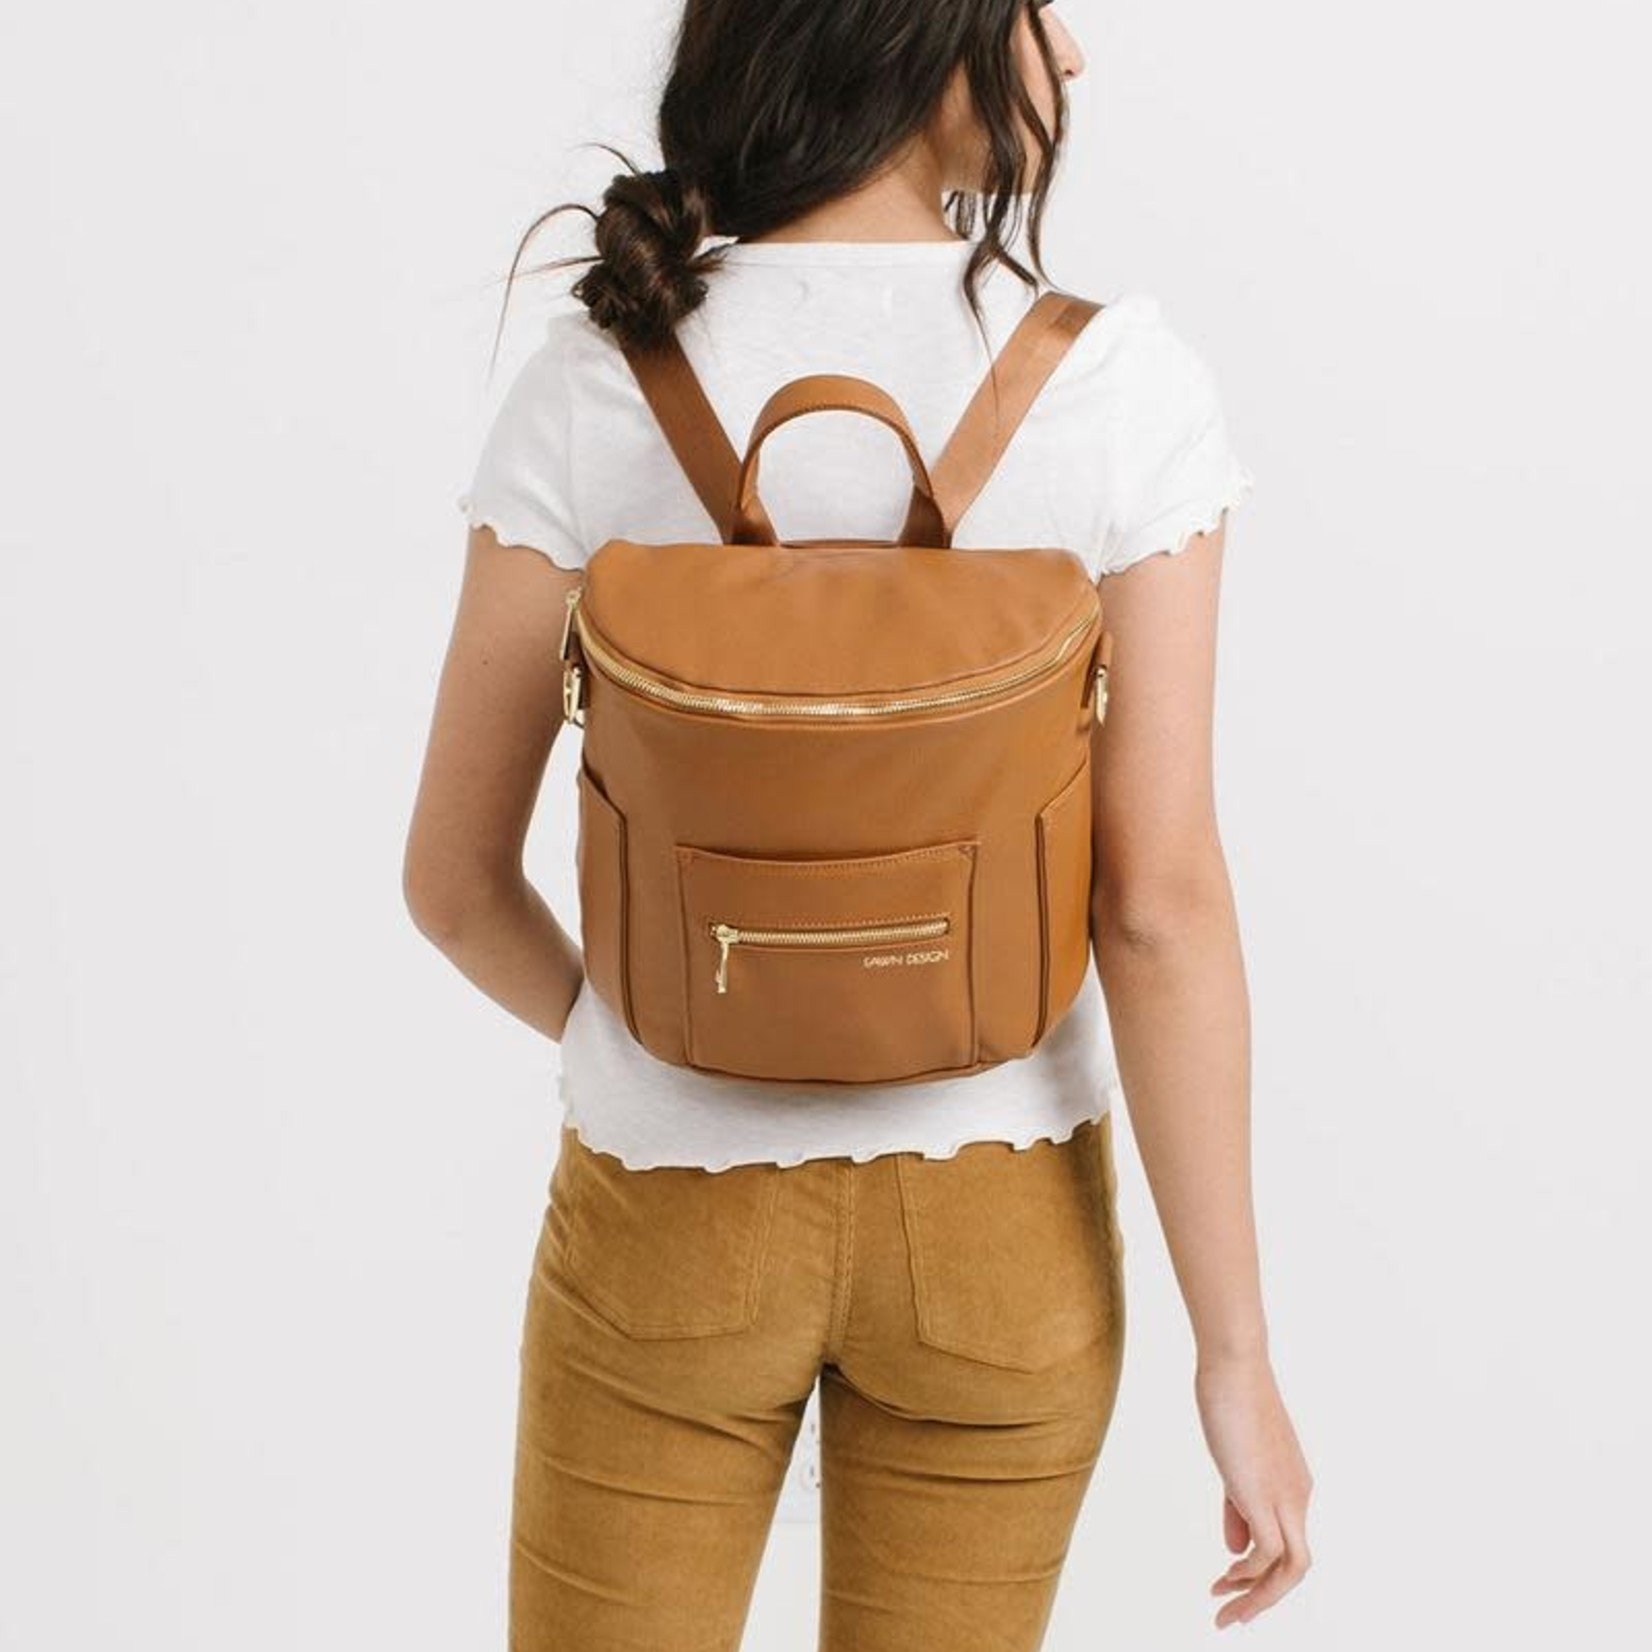 Fawn Design The Mini, Brown - IN STORE PICKUP OR LOCAL DELIVERY ONLY - WITHIN 10 MILES.